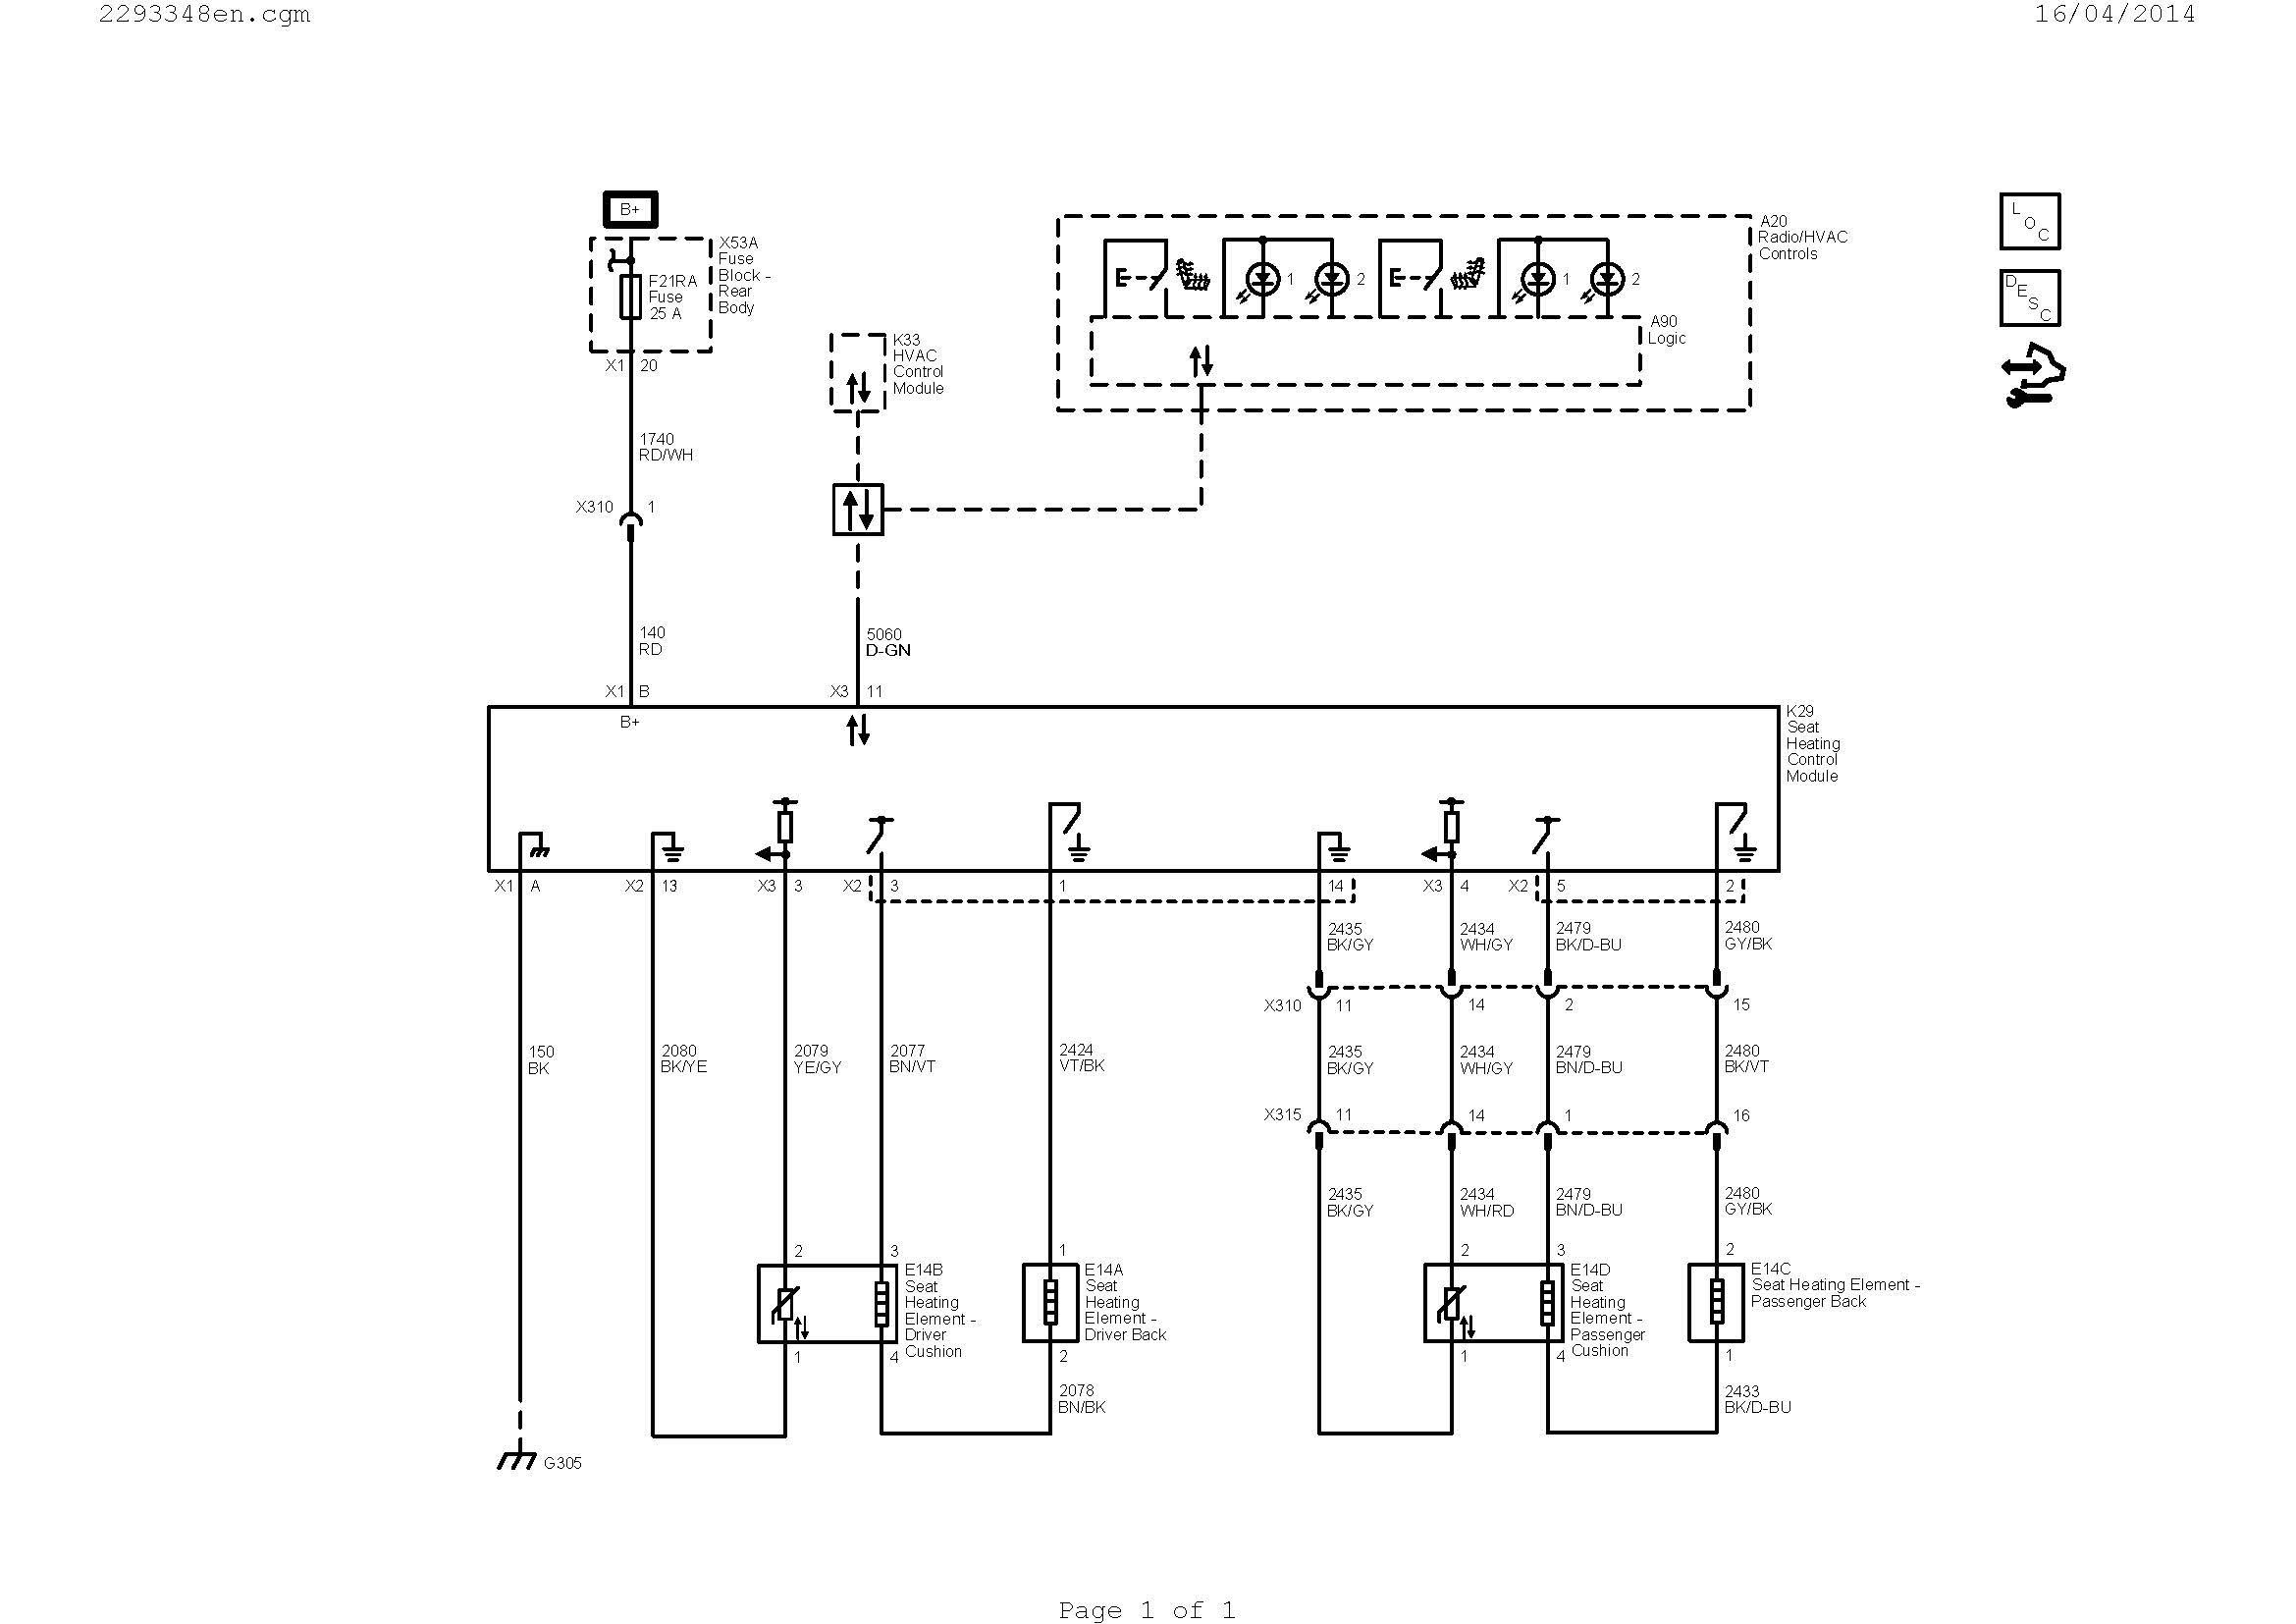 split unit wiring diagram Collection Wiring A Ac Thermostat Diagram New Wiring Diagram Ac Valid DOWNLOAD Wiring Diagram